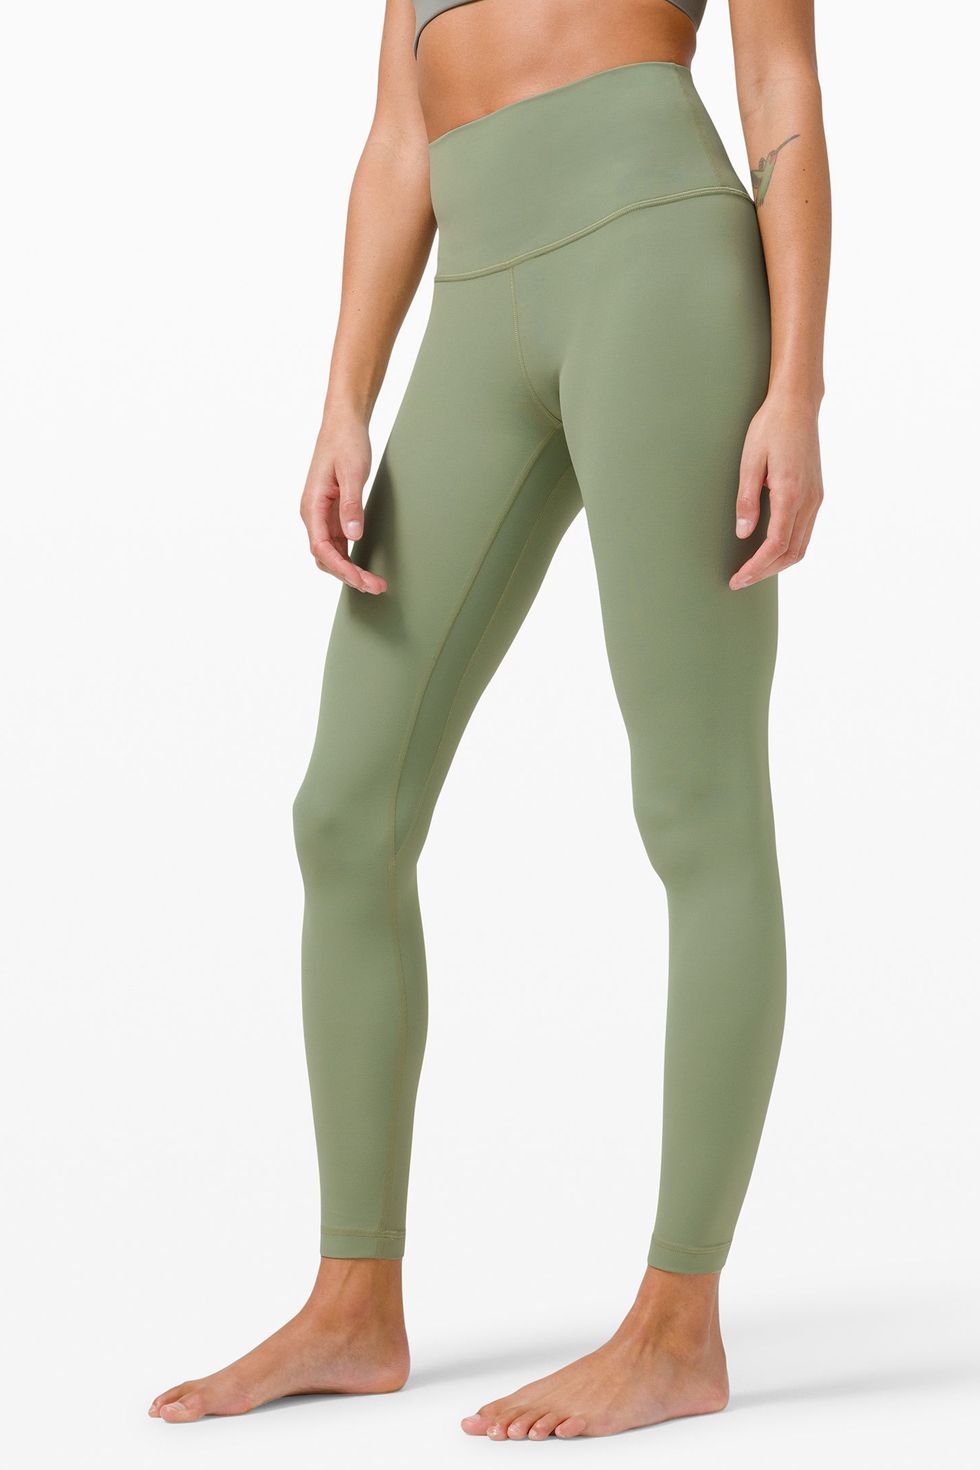 Green Solid Leggings - Selling Fast at